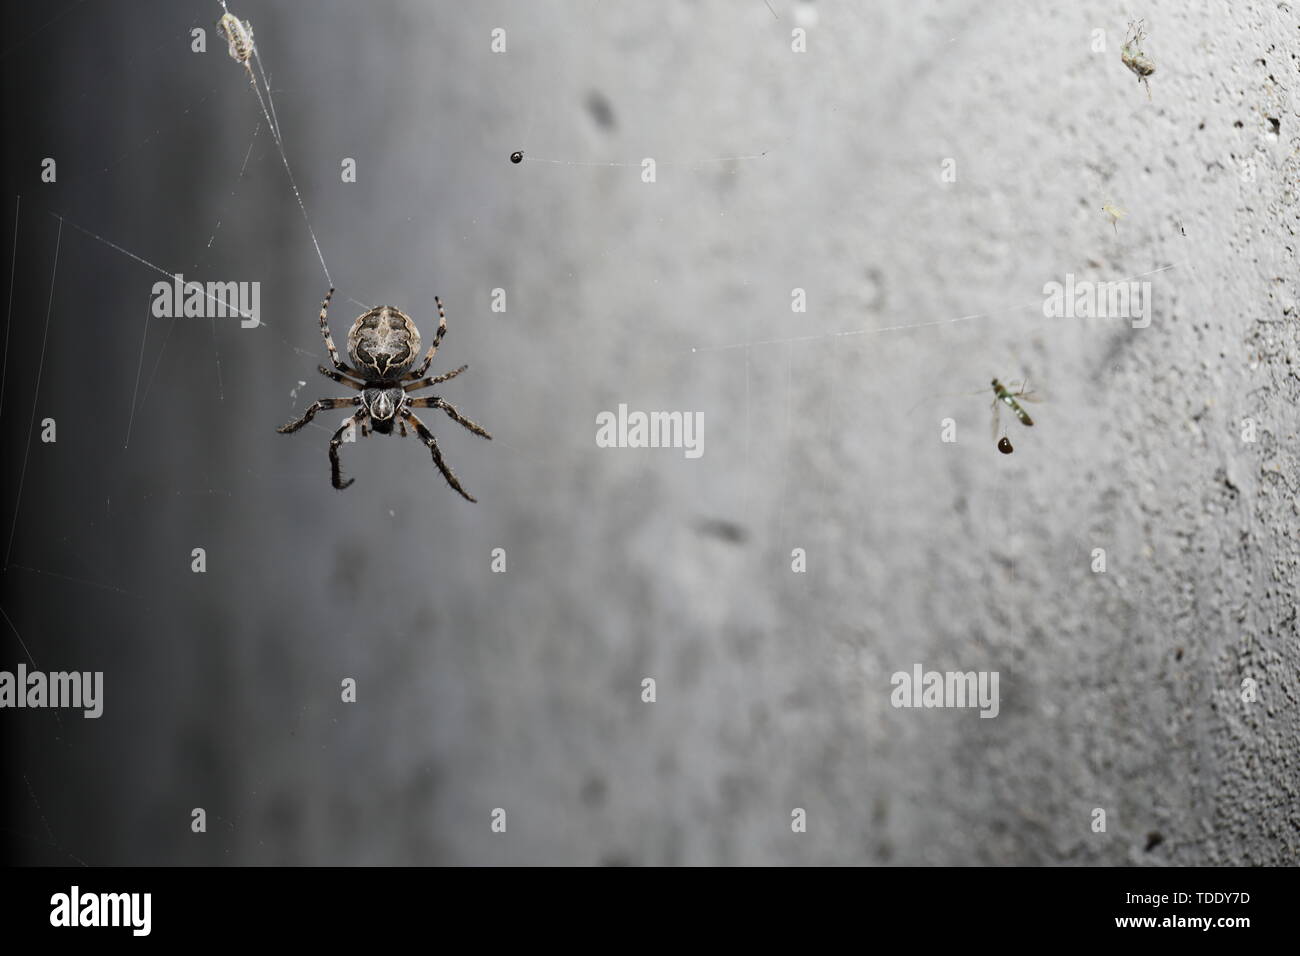 A fat, short legged spider sitting on its web facing downward in front of a concrete wall. Previous kills litter the web. Stock Photo